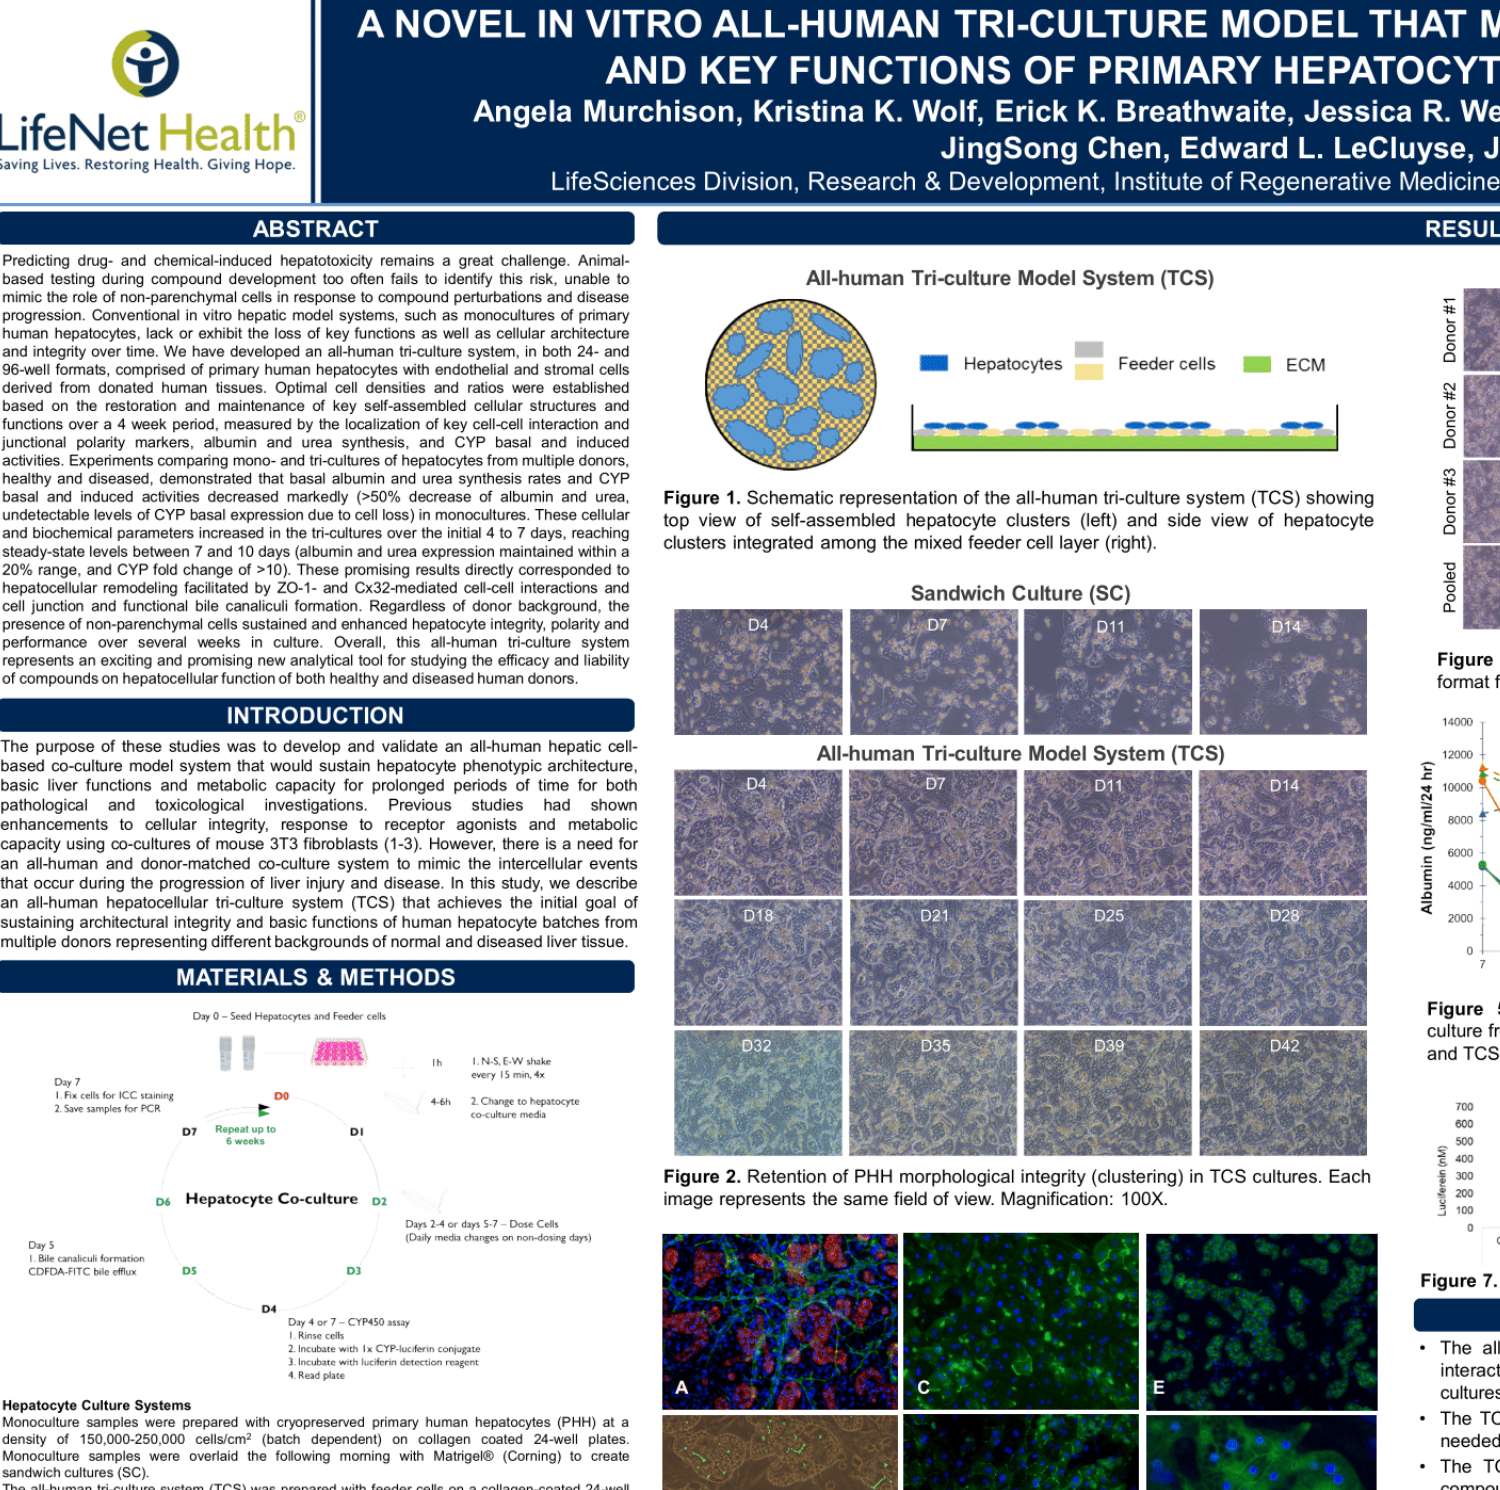 Presented at Society of Toxicology 58th Annual Meeting and ToxExpo